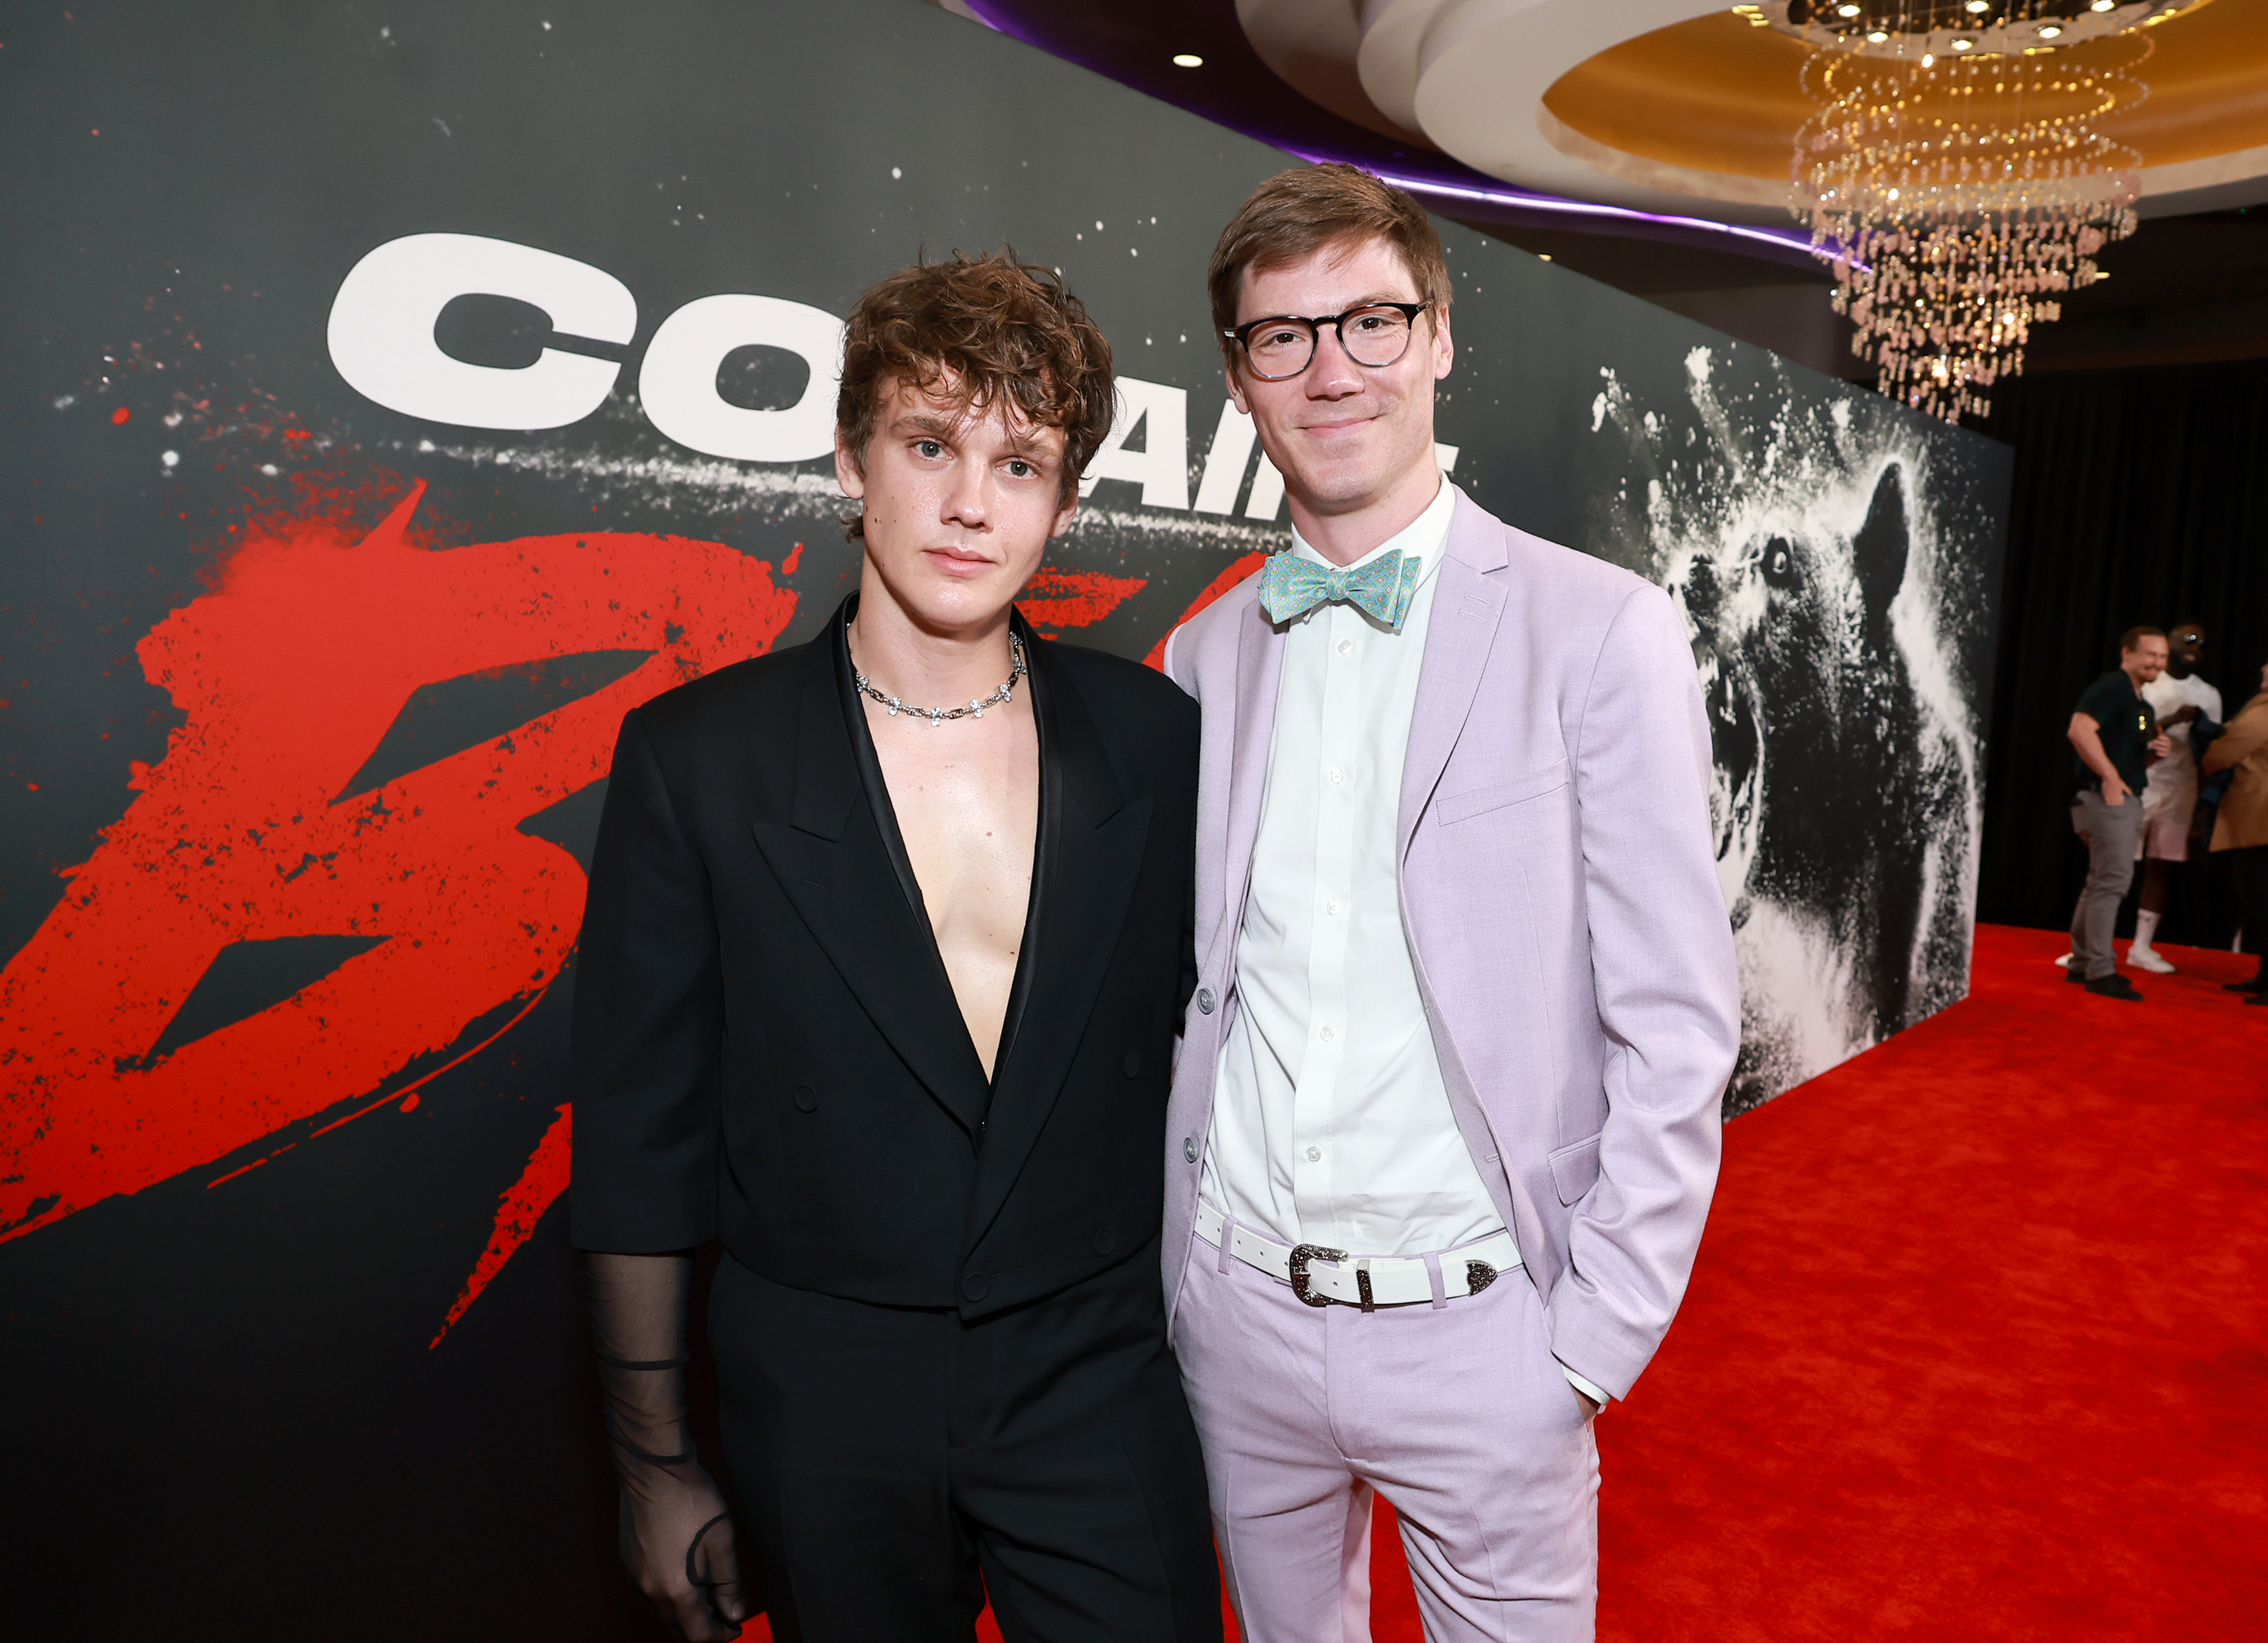 Hunter Doohan and Fielder Jewett at the Los Angeles premiere of "Cocaine Bear" on February 21, 2023, in California | Source: Getty Images